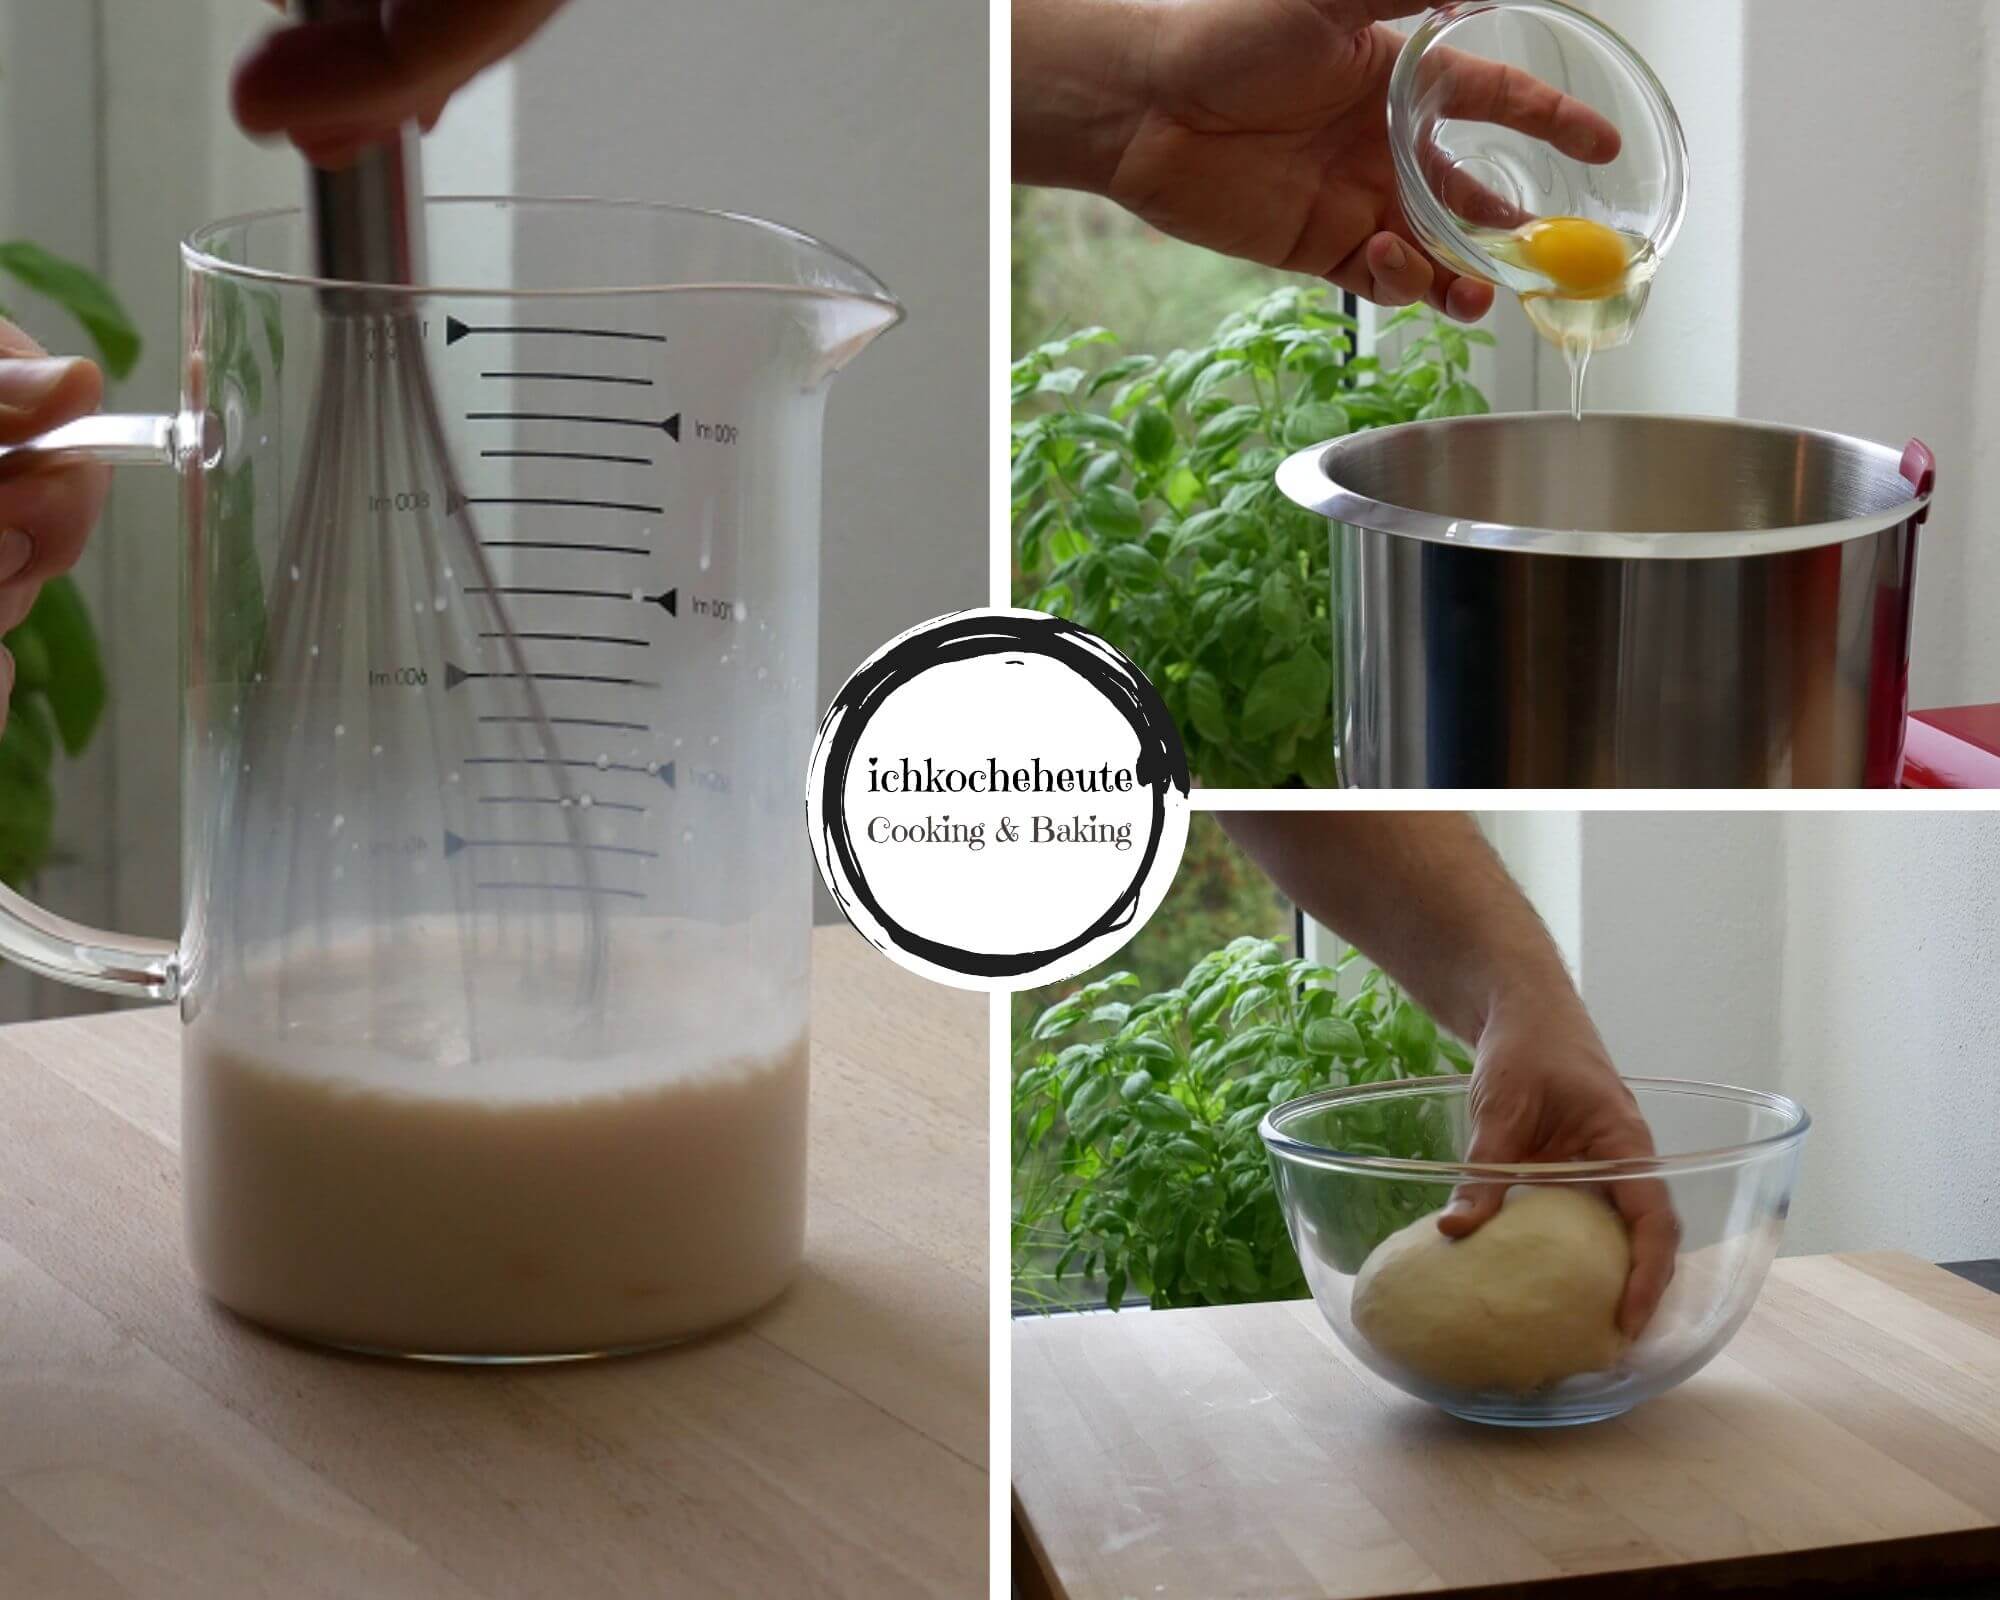 Preparation for Yeast Dough